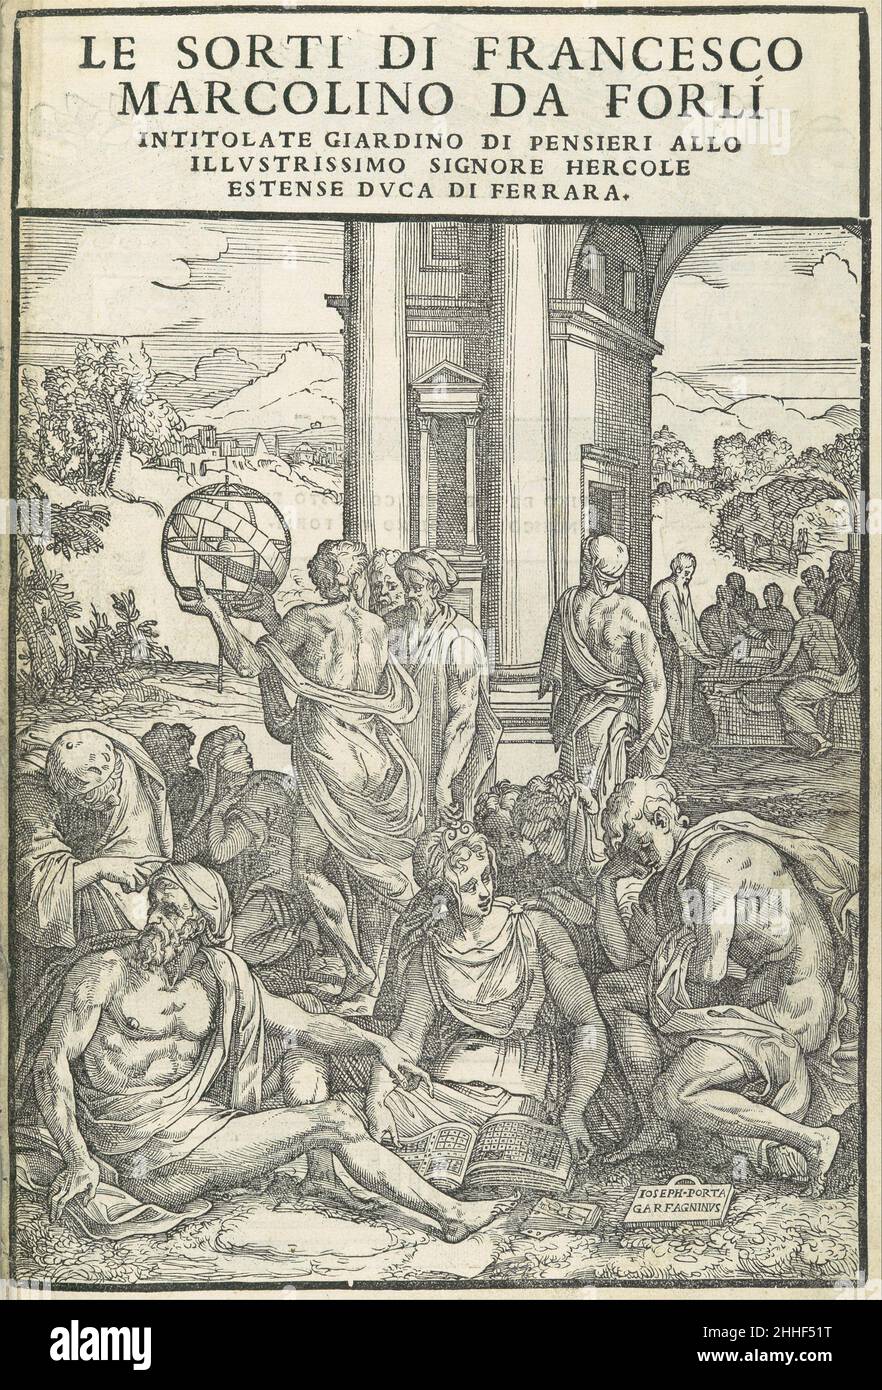 Le Sorti...intitolate giardino di pensieri October 1540 Written and published by Francesco Marcolini da Forli Italian The evocative woodcut that adorns the frontispiece of this fortune-telling book is prominently signed by the artist Giuseppe Porta (ca. 1520–ca. 1575) from the Garfagnana region of northern Tuscany, who later took the name Salviati in honor of his teacher, the well-known Mannerist painter Francesco Salviati. However, the composition is not original to Porta but closely copies an engraving by Marco Dente, a student of Marcantonio Raimondi who died in the Sack of Rome of 1527. By Stock Photo